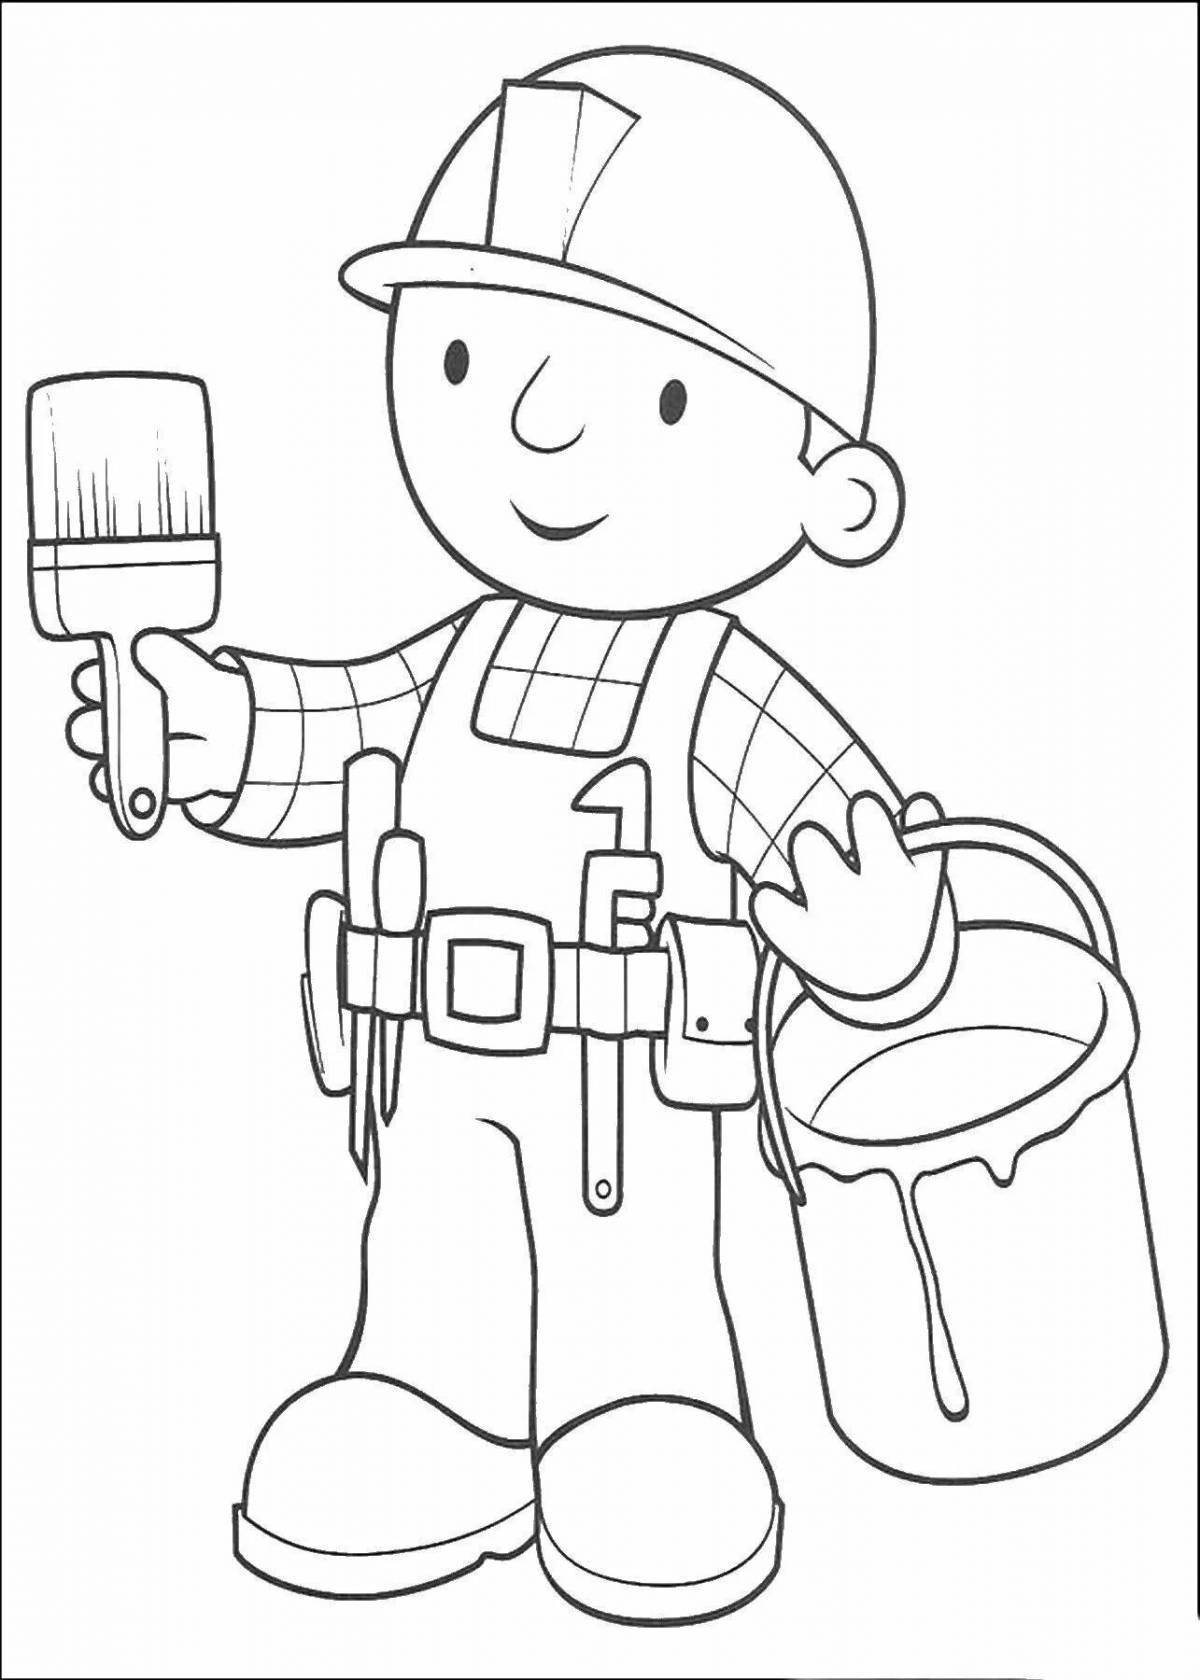 Creative occupation coloring pages for preschoolers